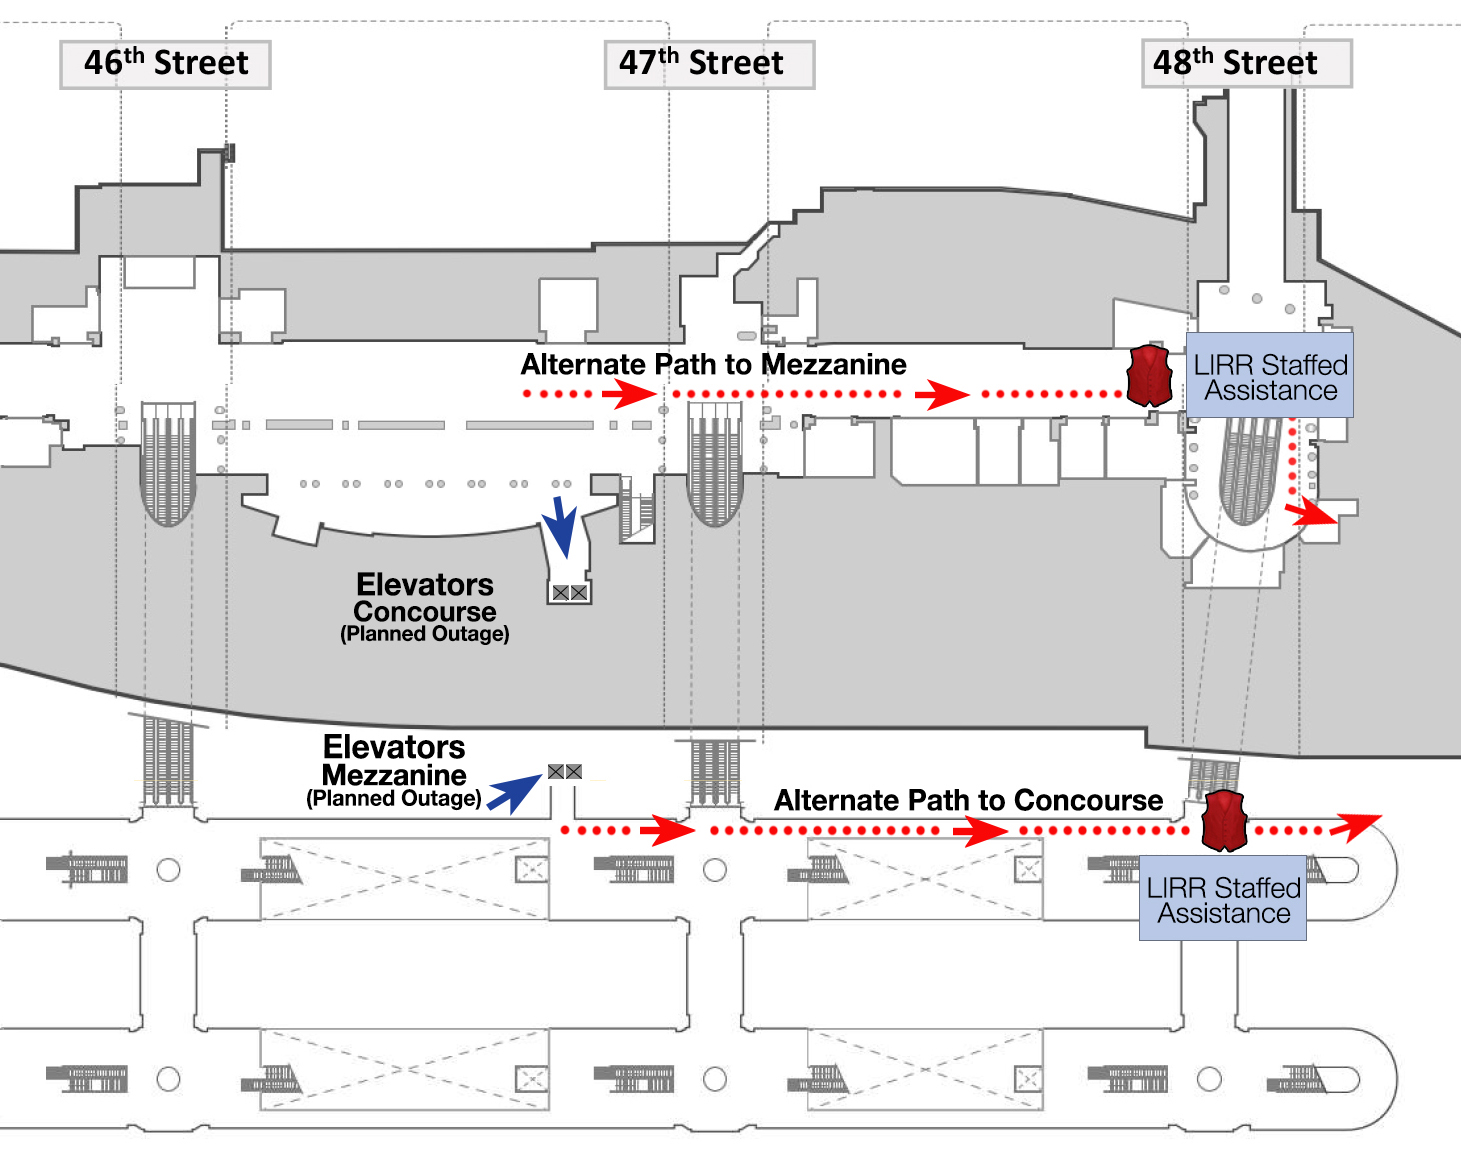 A map of the mezzanine and concourse at Grand Central Madison, showing that elevators between the mezzanine and concourse near 47th Street are out of service. Arrows direct customers on both the mezzanine and concourse levels toward 48th Street, where they can find LIRR staff to assist them with alternate elevators.